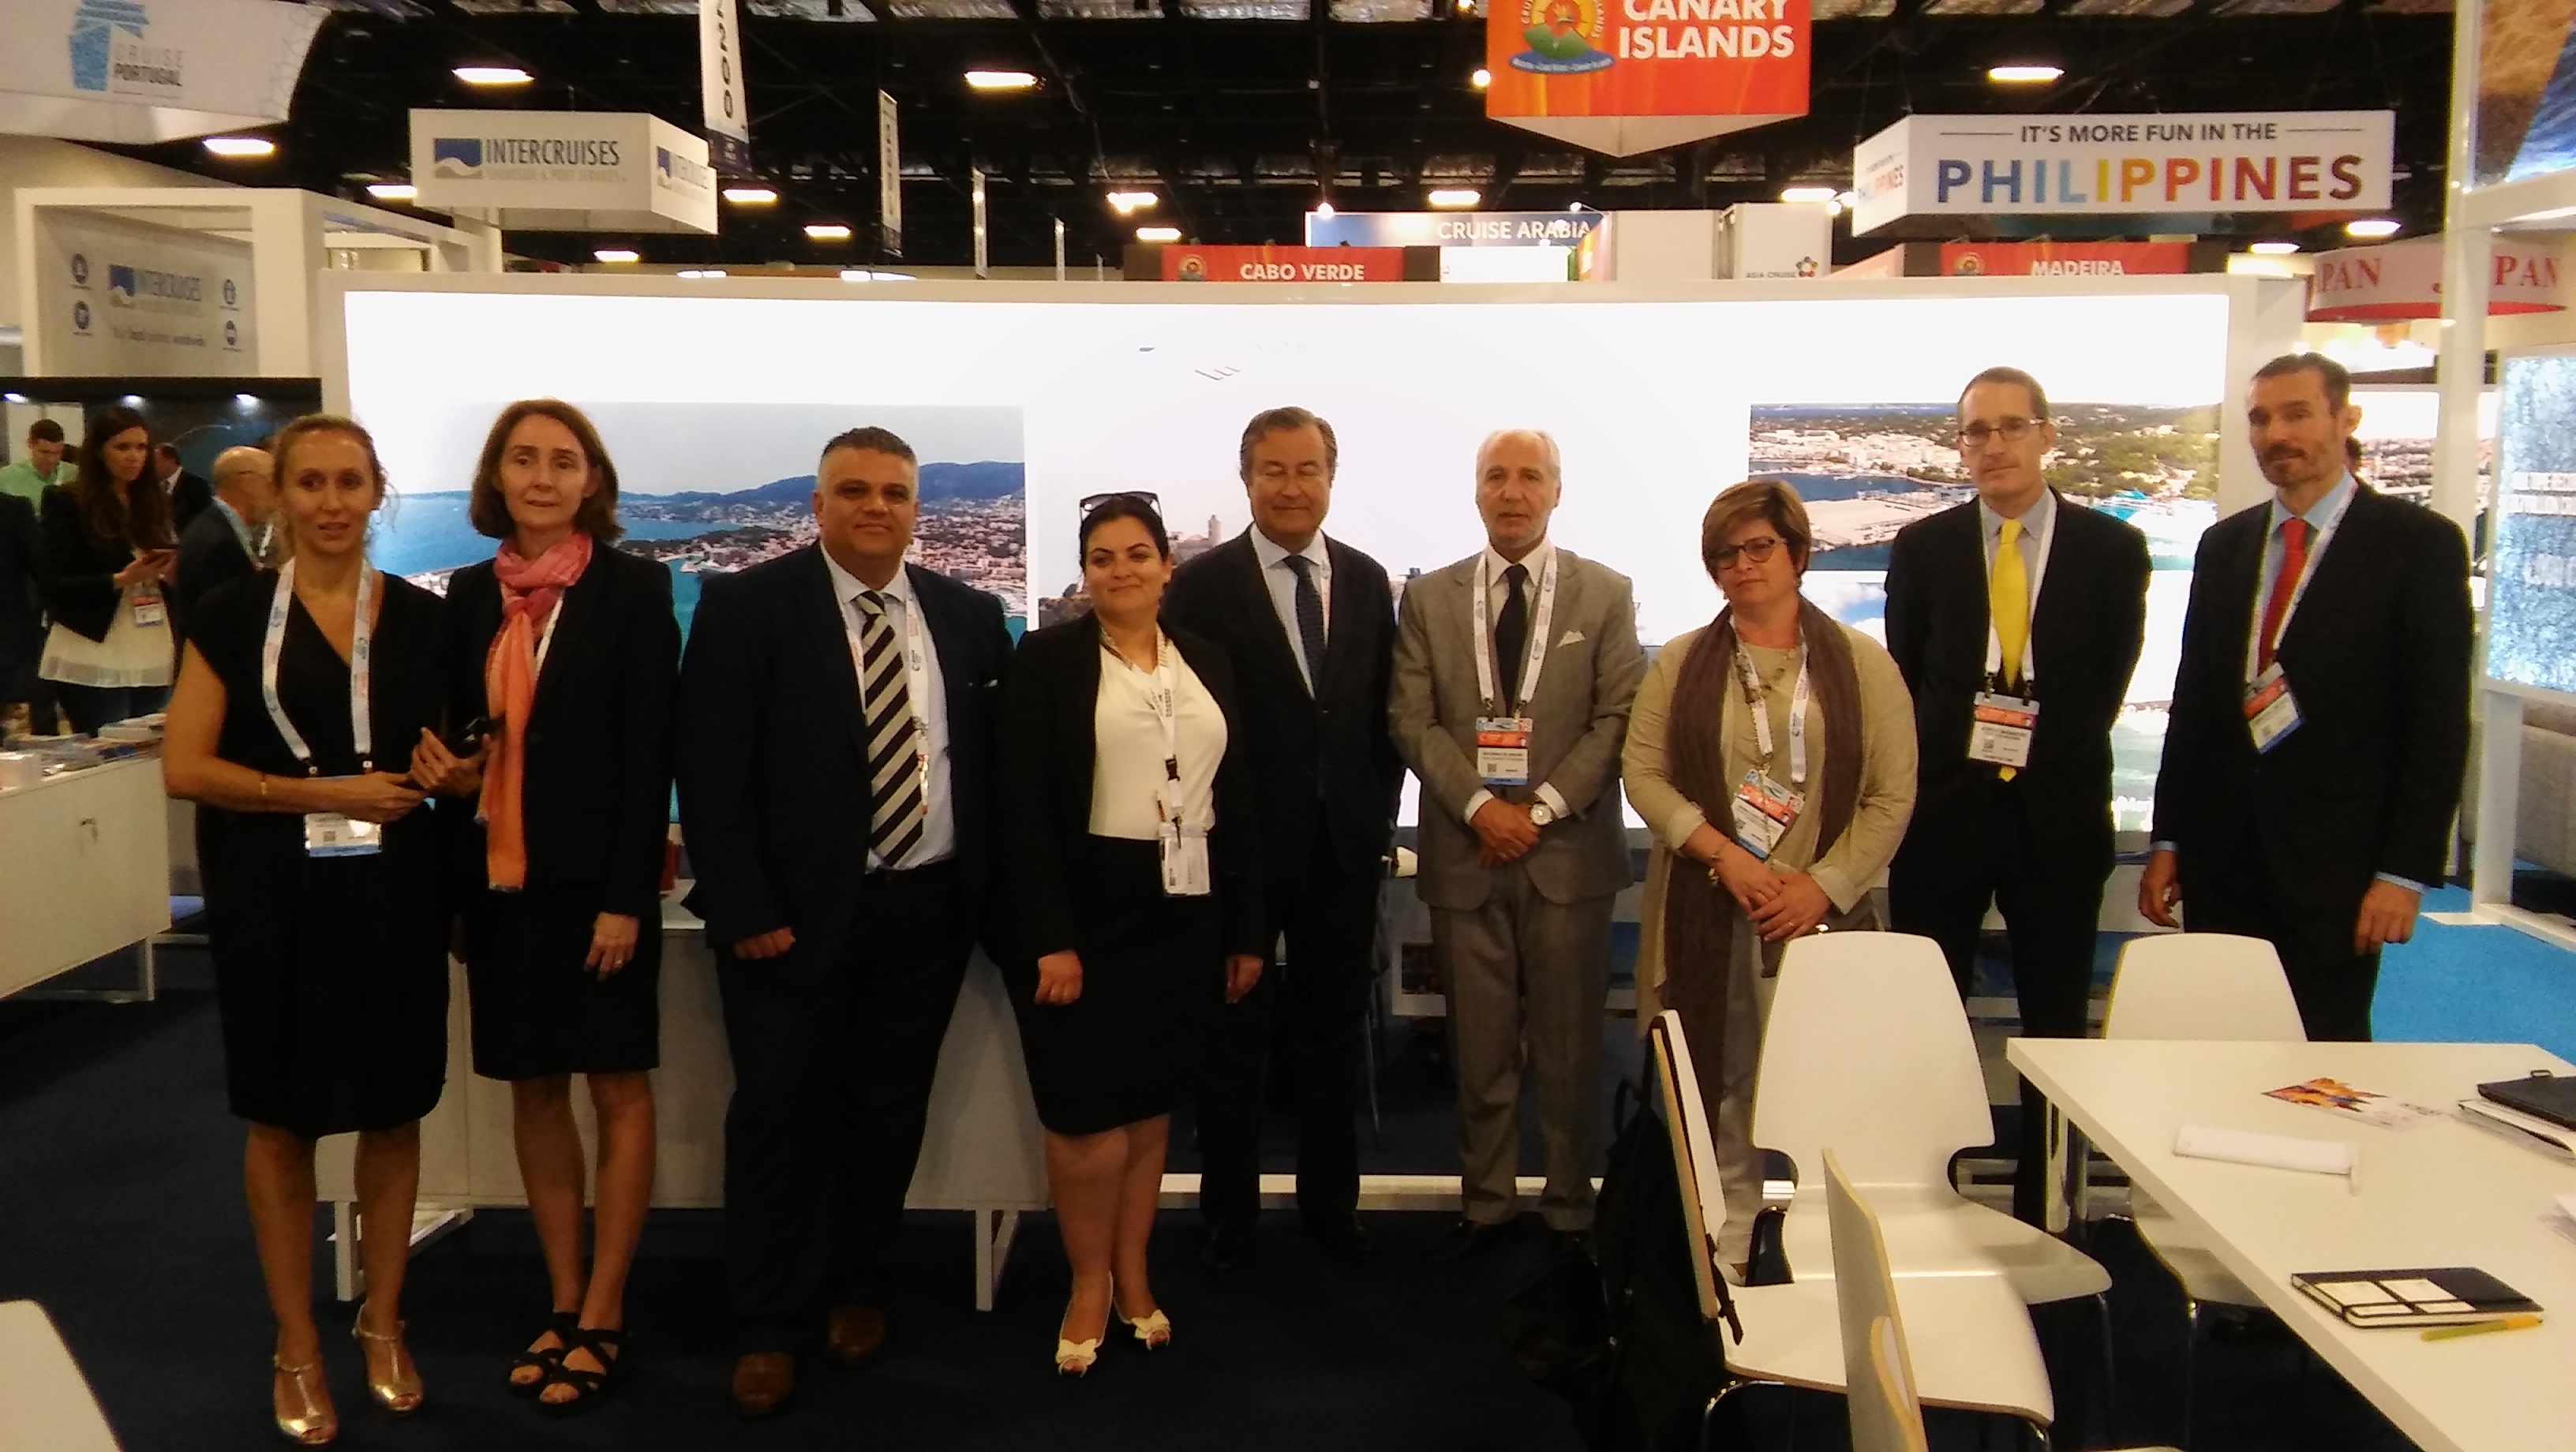 The APB presents ‘Mediterranean Routes’ at the Seatrade Cruise Global event, promoting the Port of Mahon as a destination 